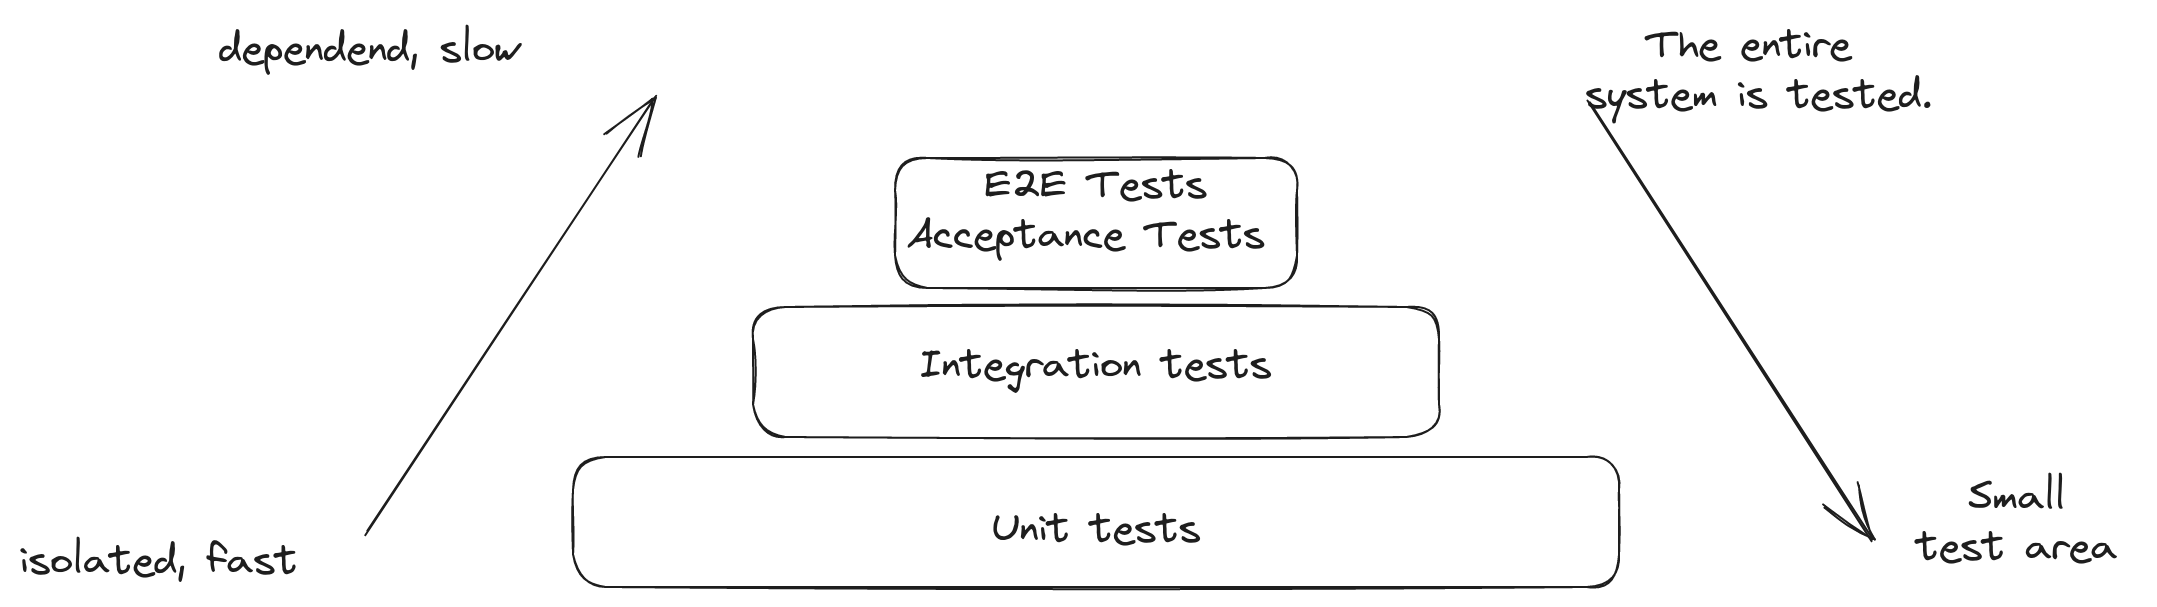 Test strategies: Top-down-testing and Bottom-up-testing